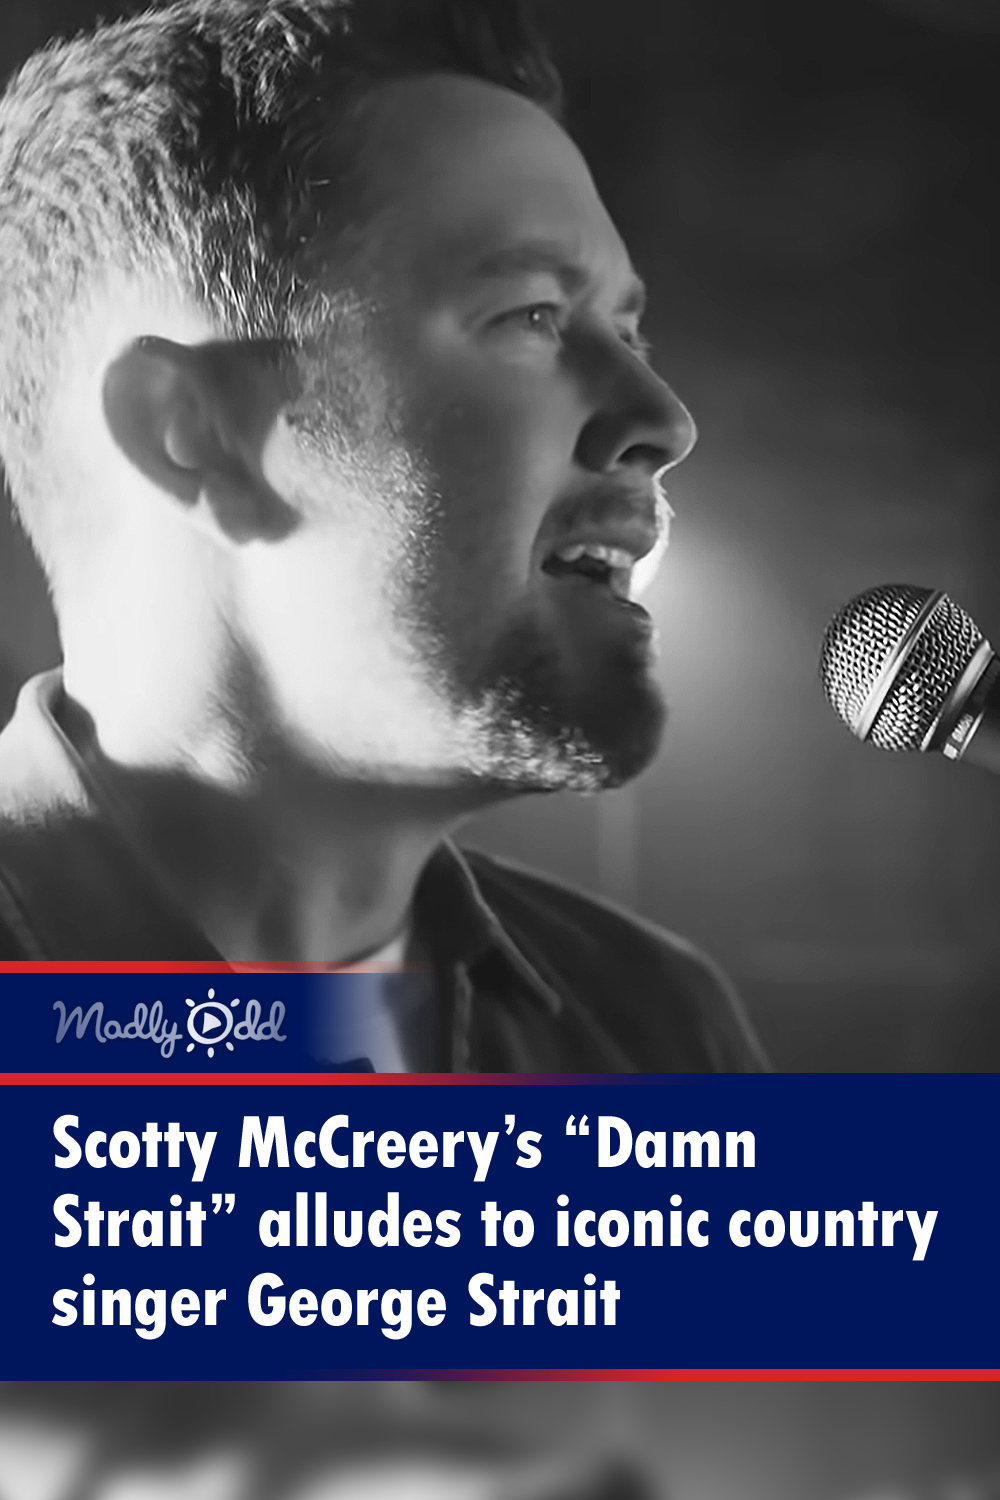 Scotty McCreery’s “Damn Strait” alludes to iconic country singer George Strait